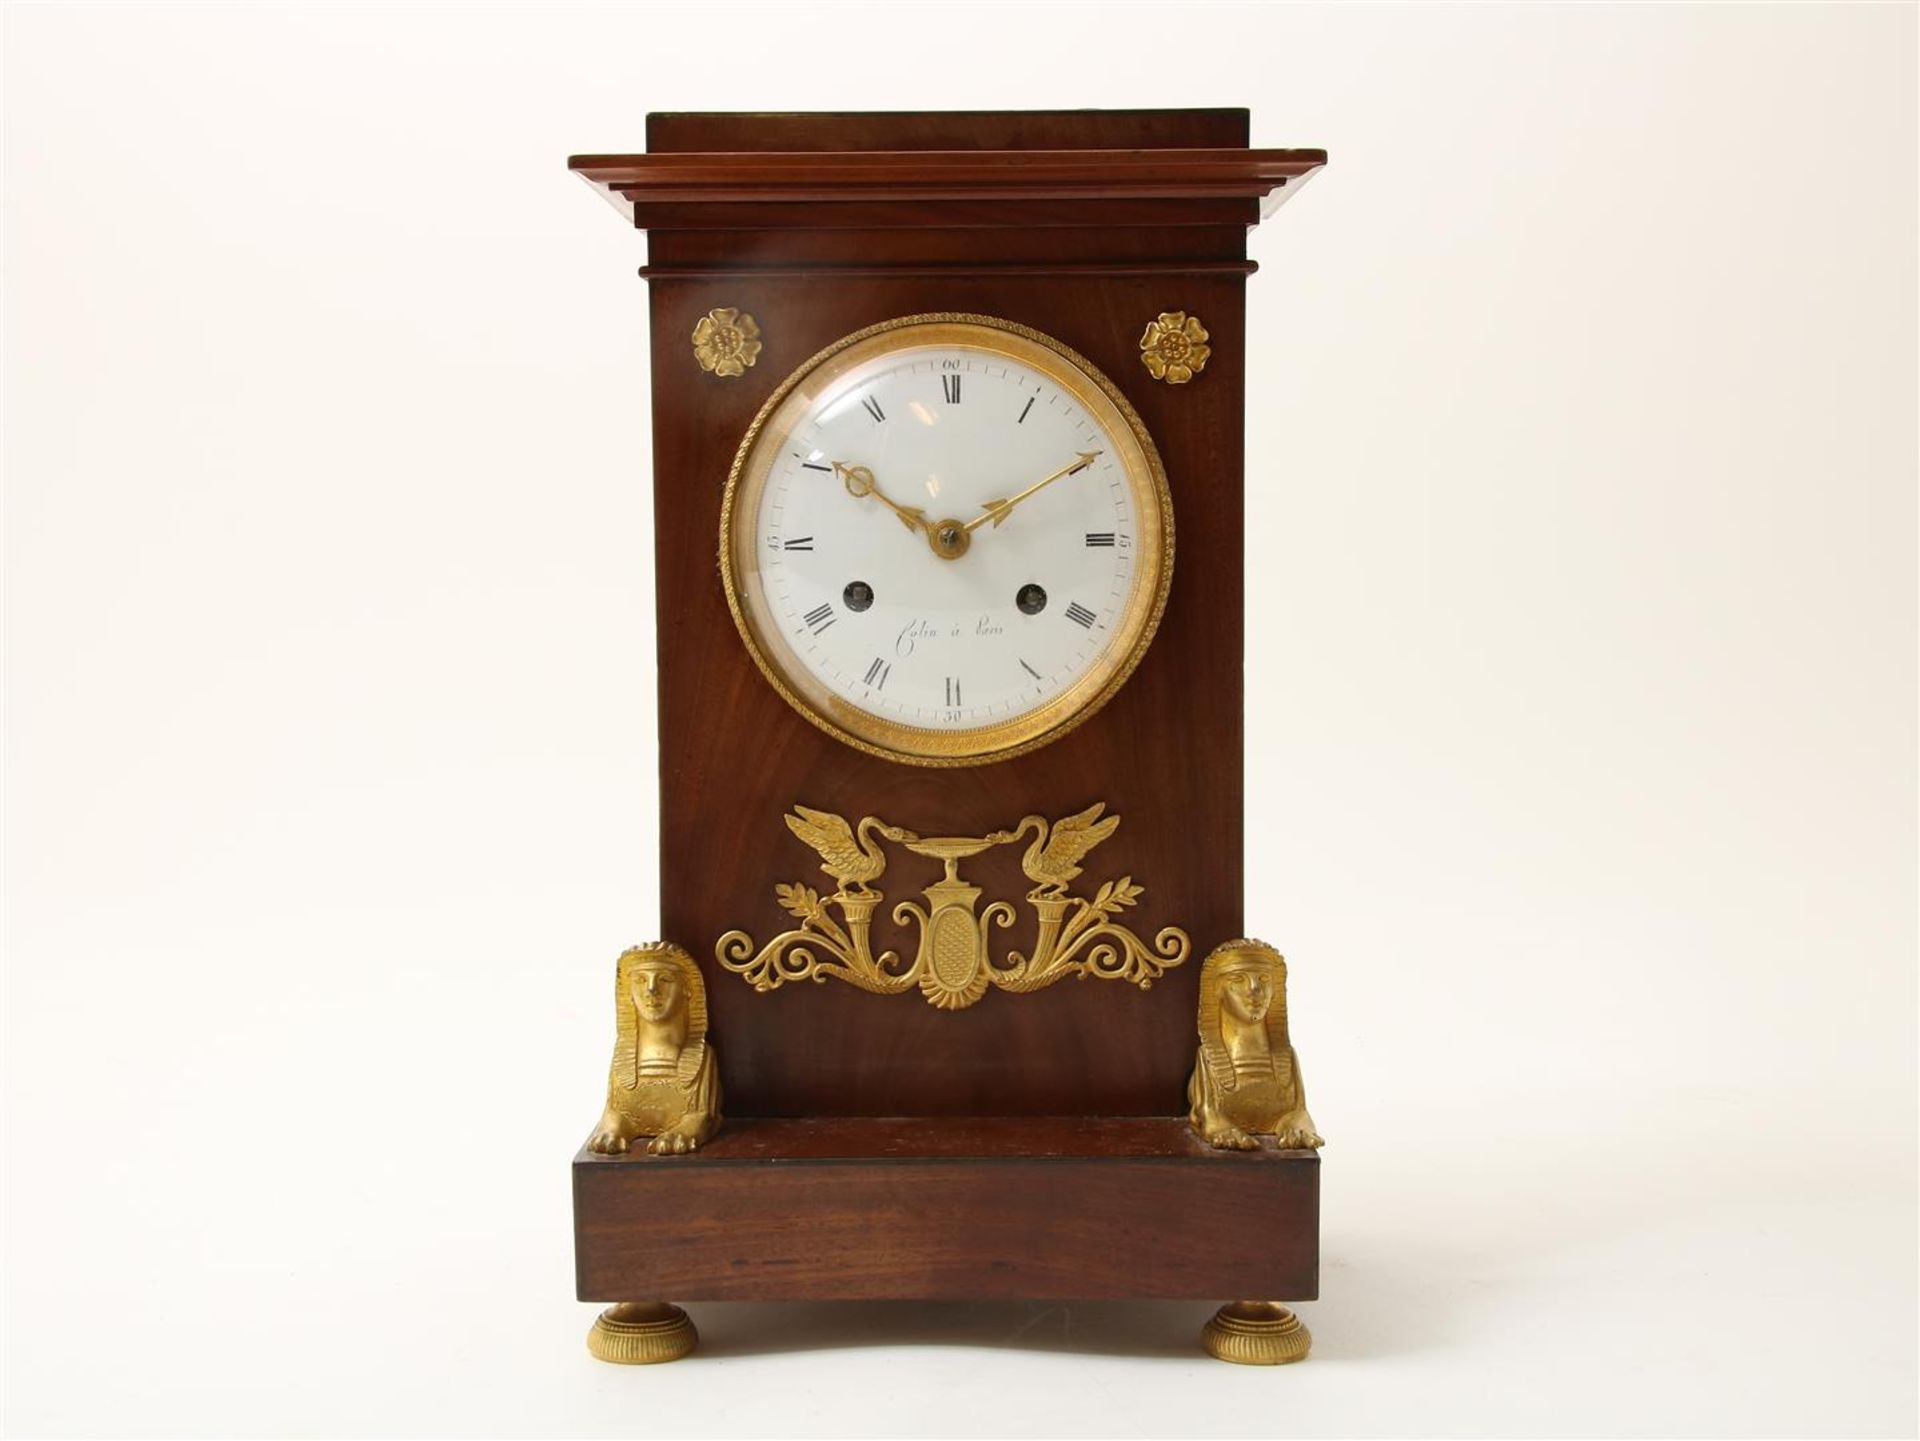 Empire mantel clock in mahogany case with white enamel dial with Roman numerals and fire-gilt Sphinx